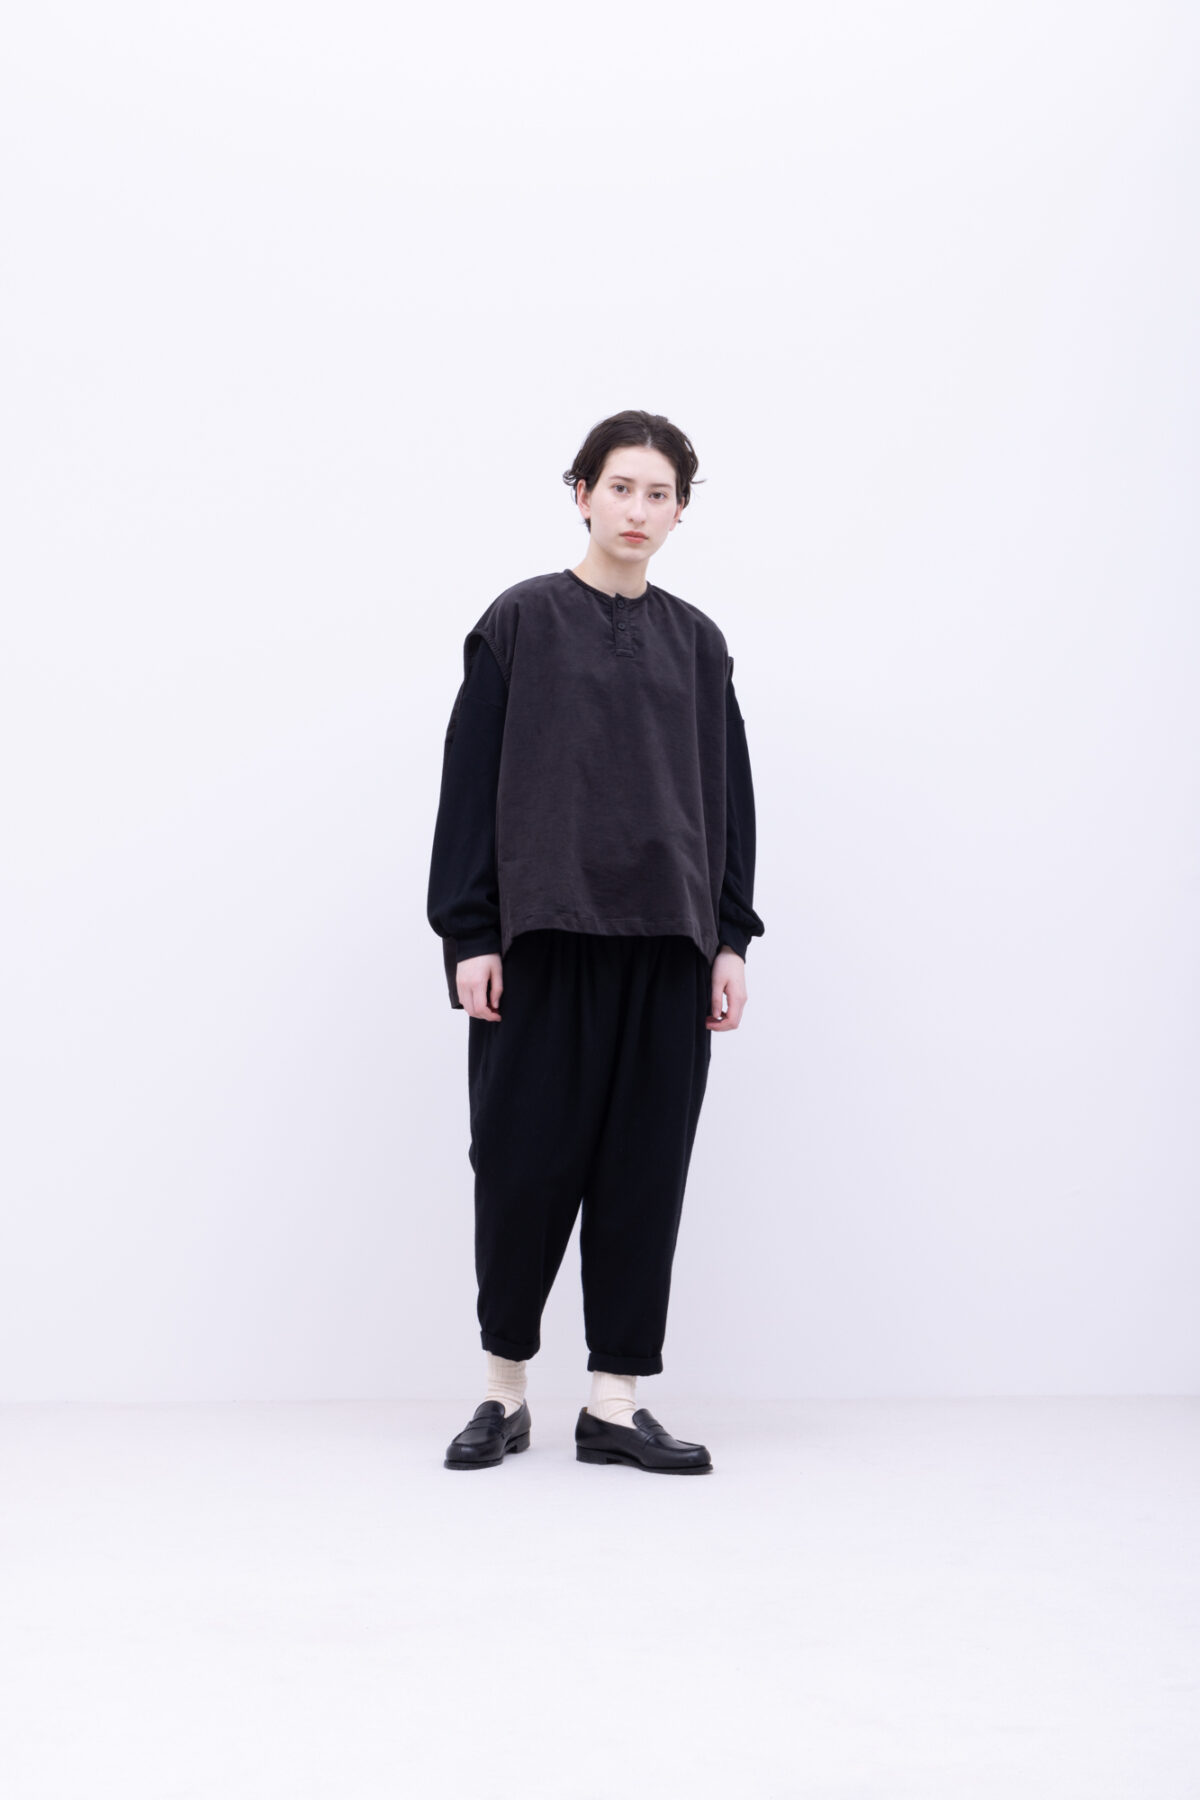 No. 052 | 2023 AW WOMENS / Model H=169cm | LOOK | FIRMUM